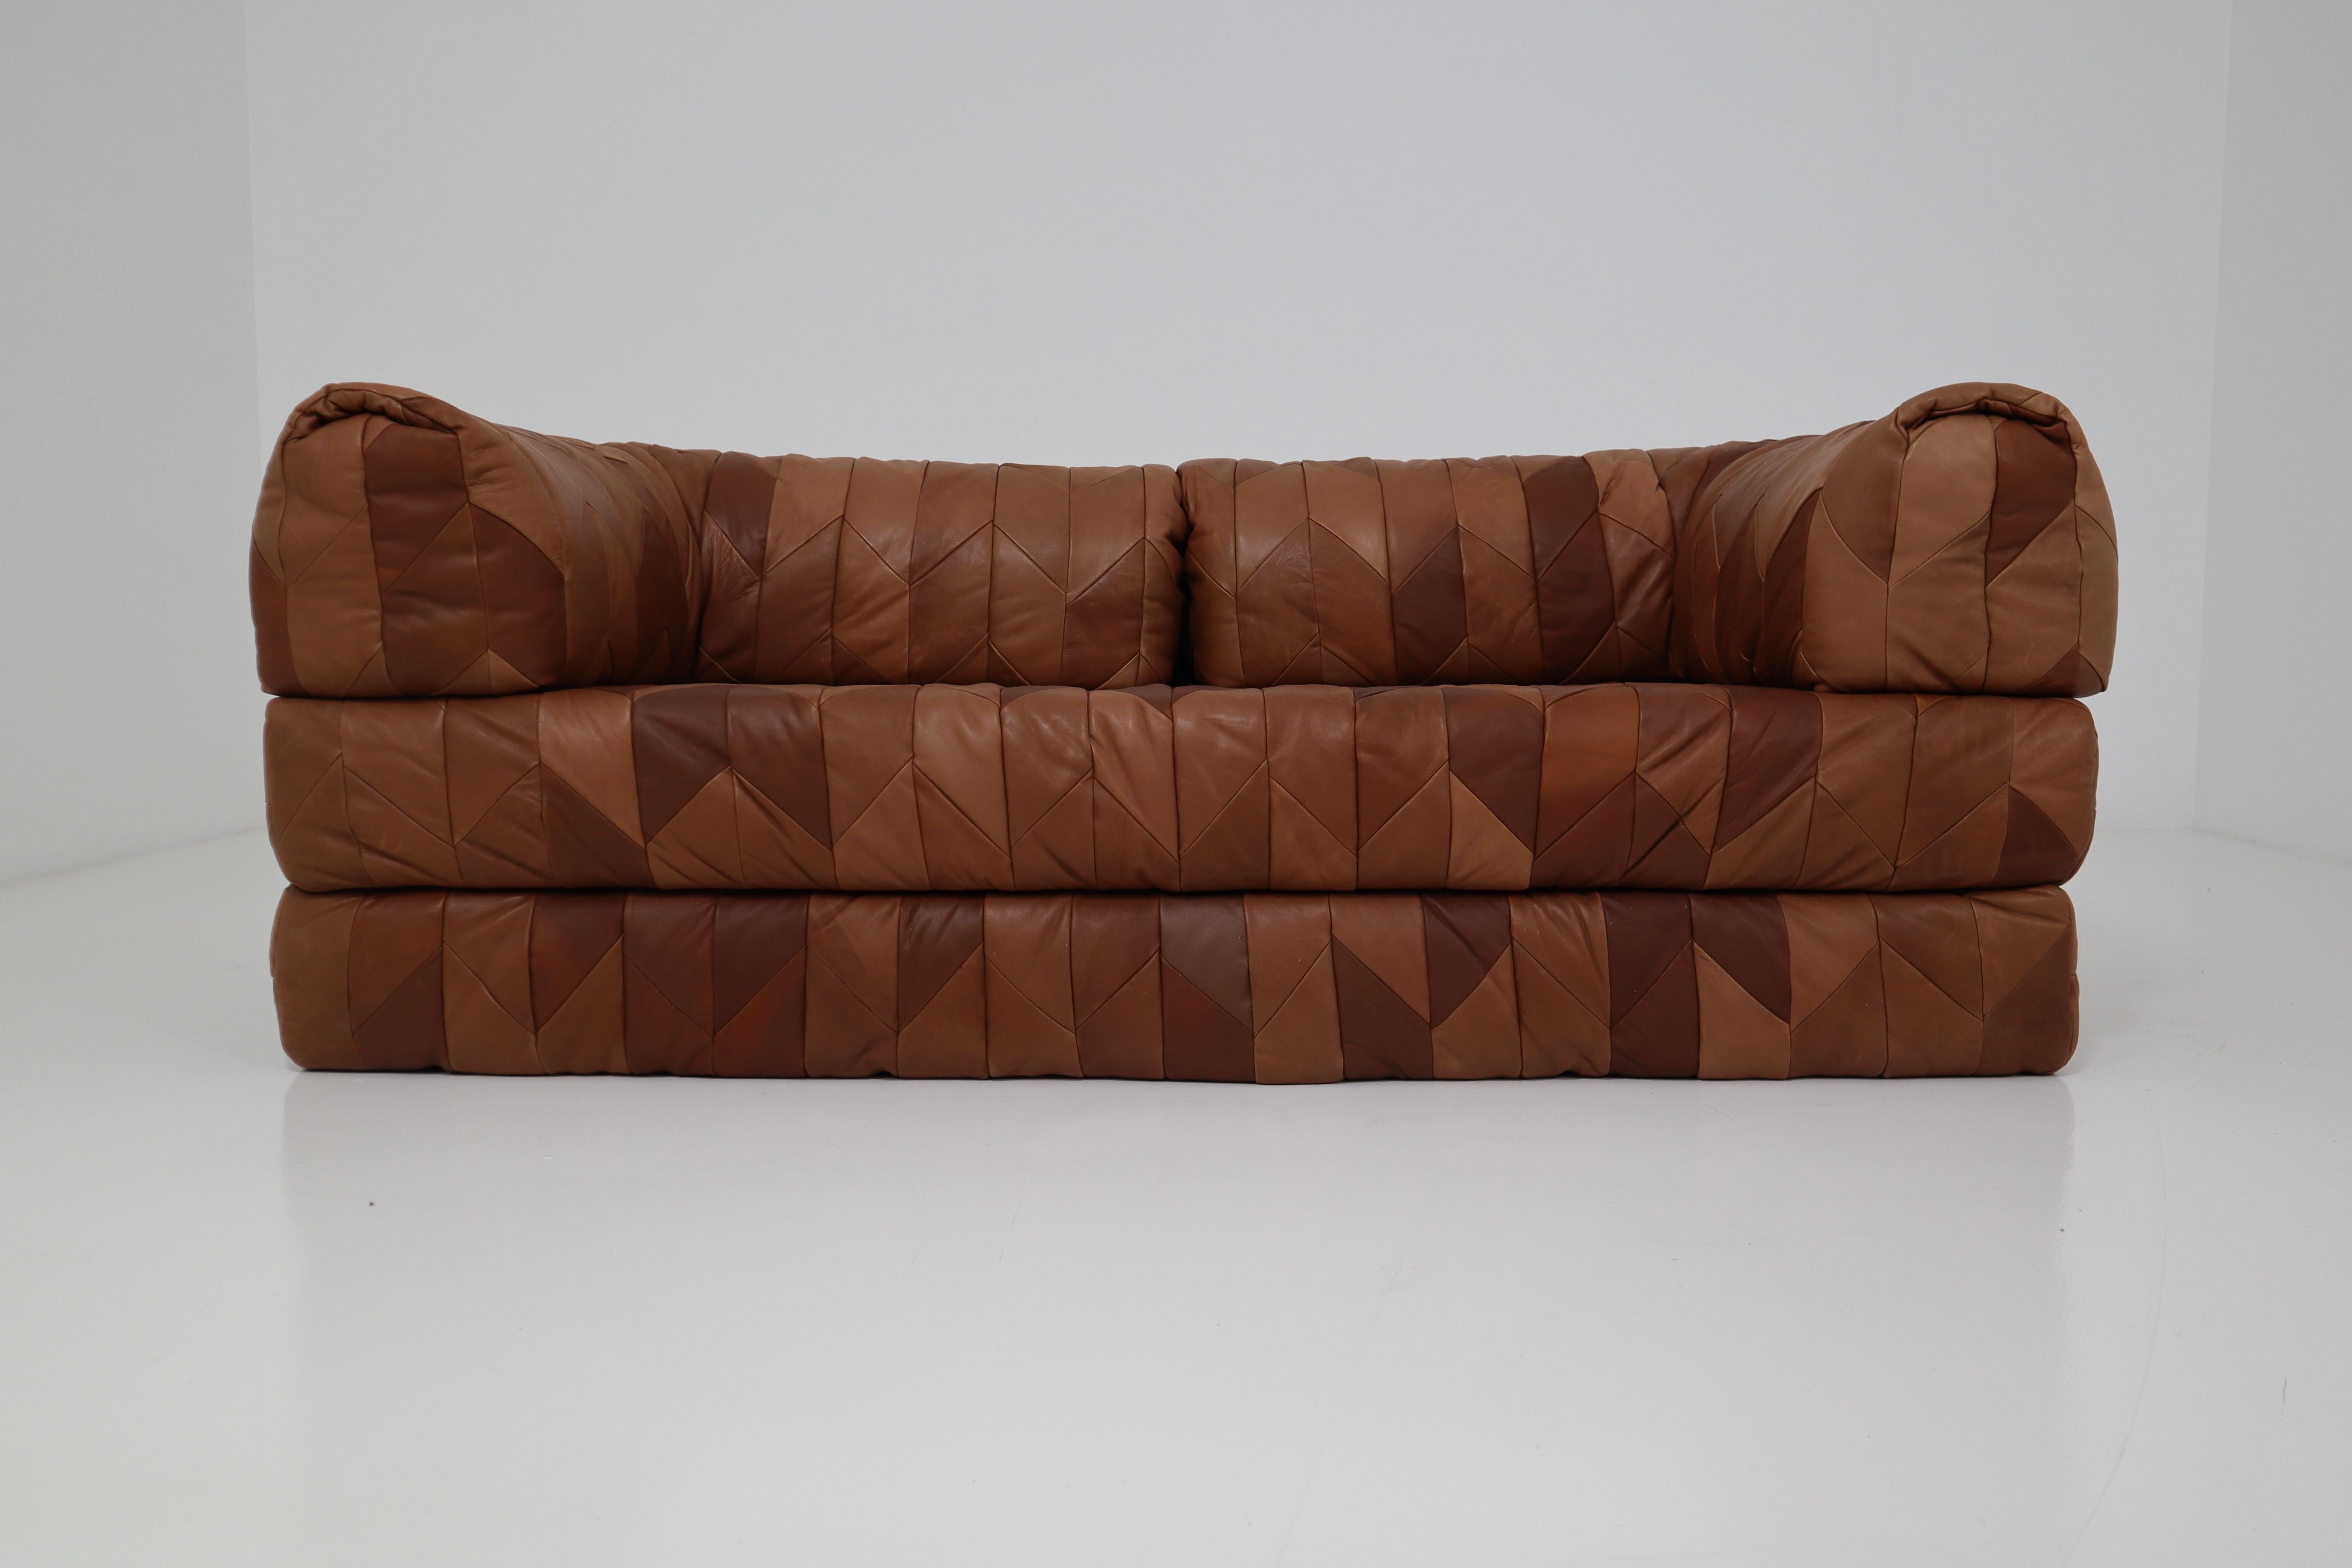 We are delighted to bring to you a highly desirable retro cognac leather patchwork daybed and sofa. Rarely available and built in the 1970s in Europe, this versatile retro daybed doubles up as a sofa and loveseat. This extremely comfortable sofa can